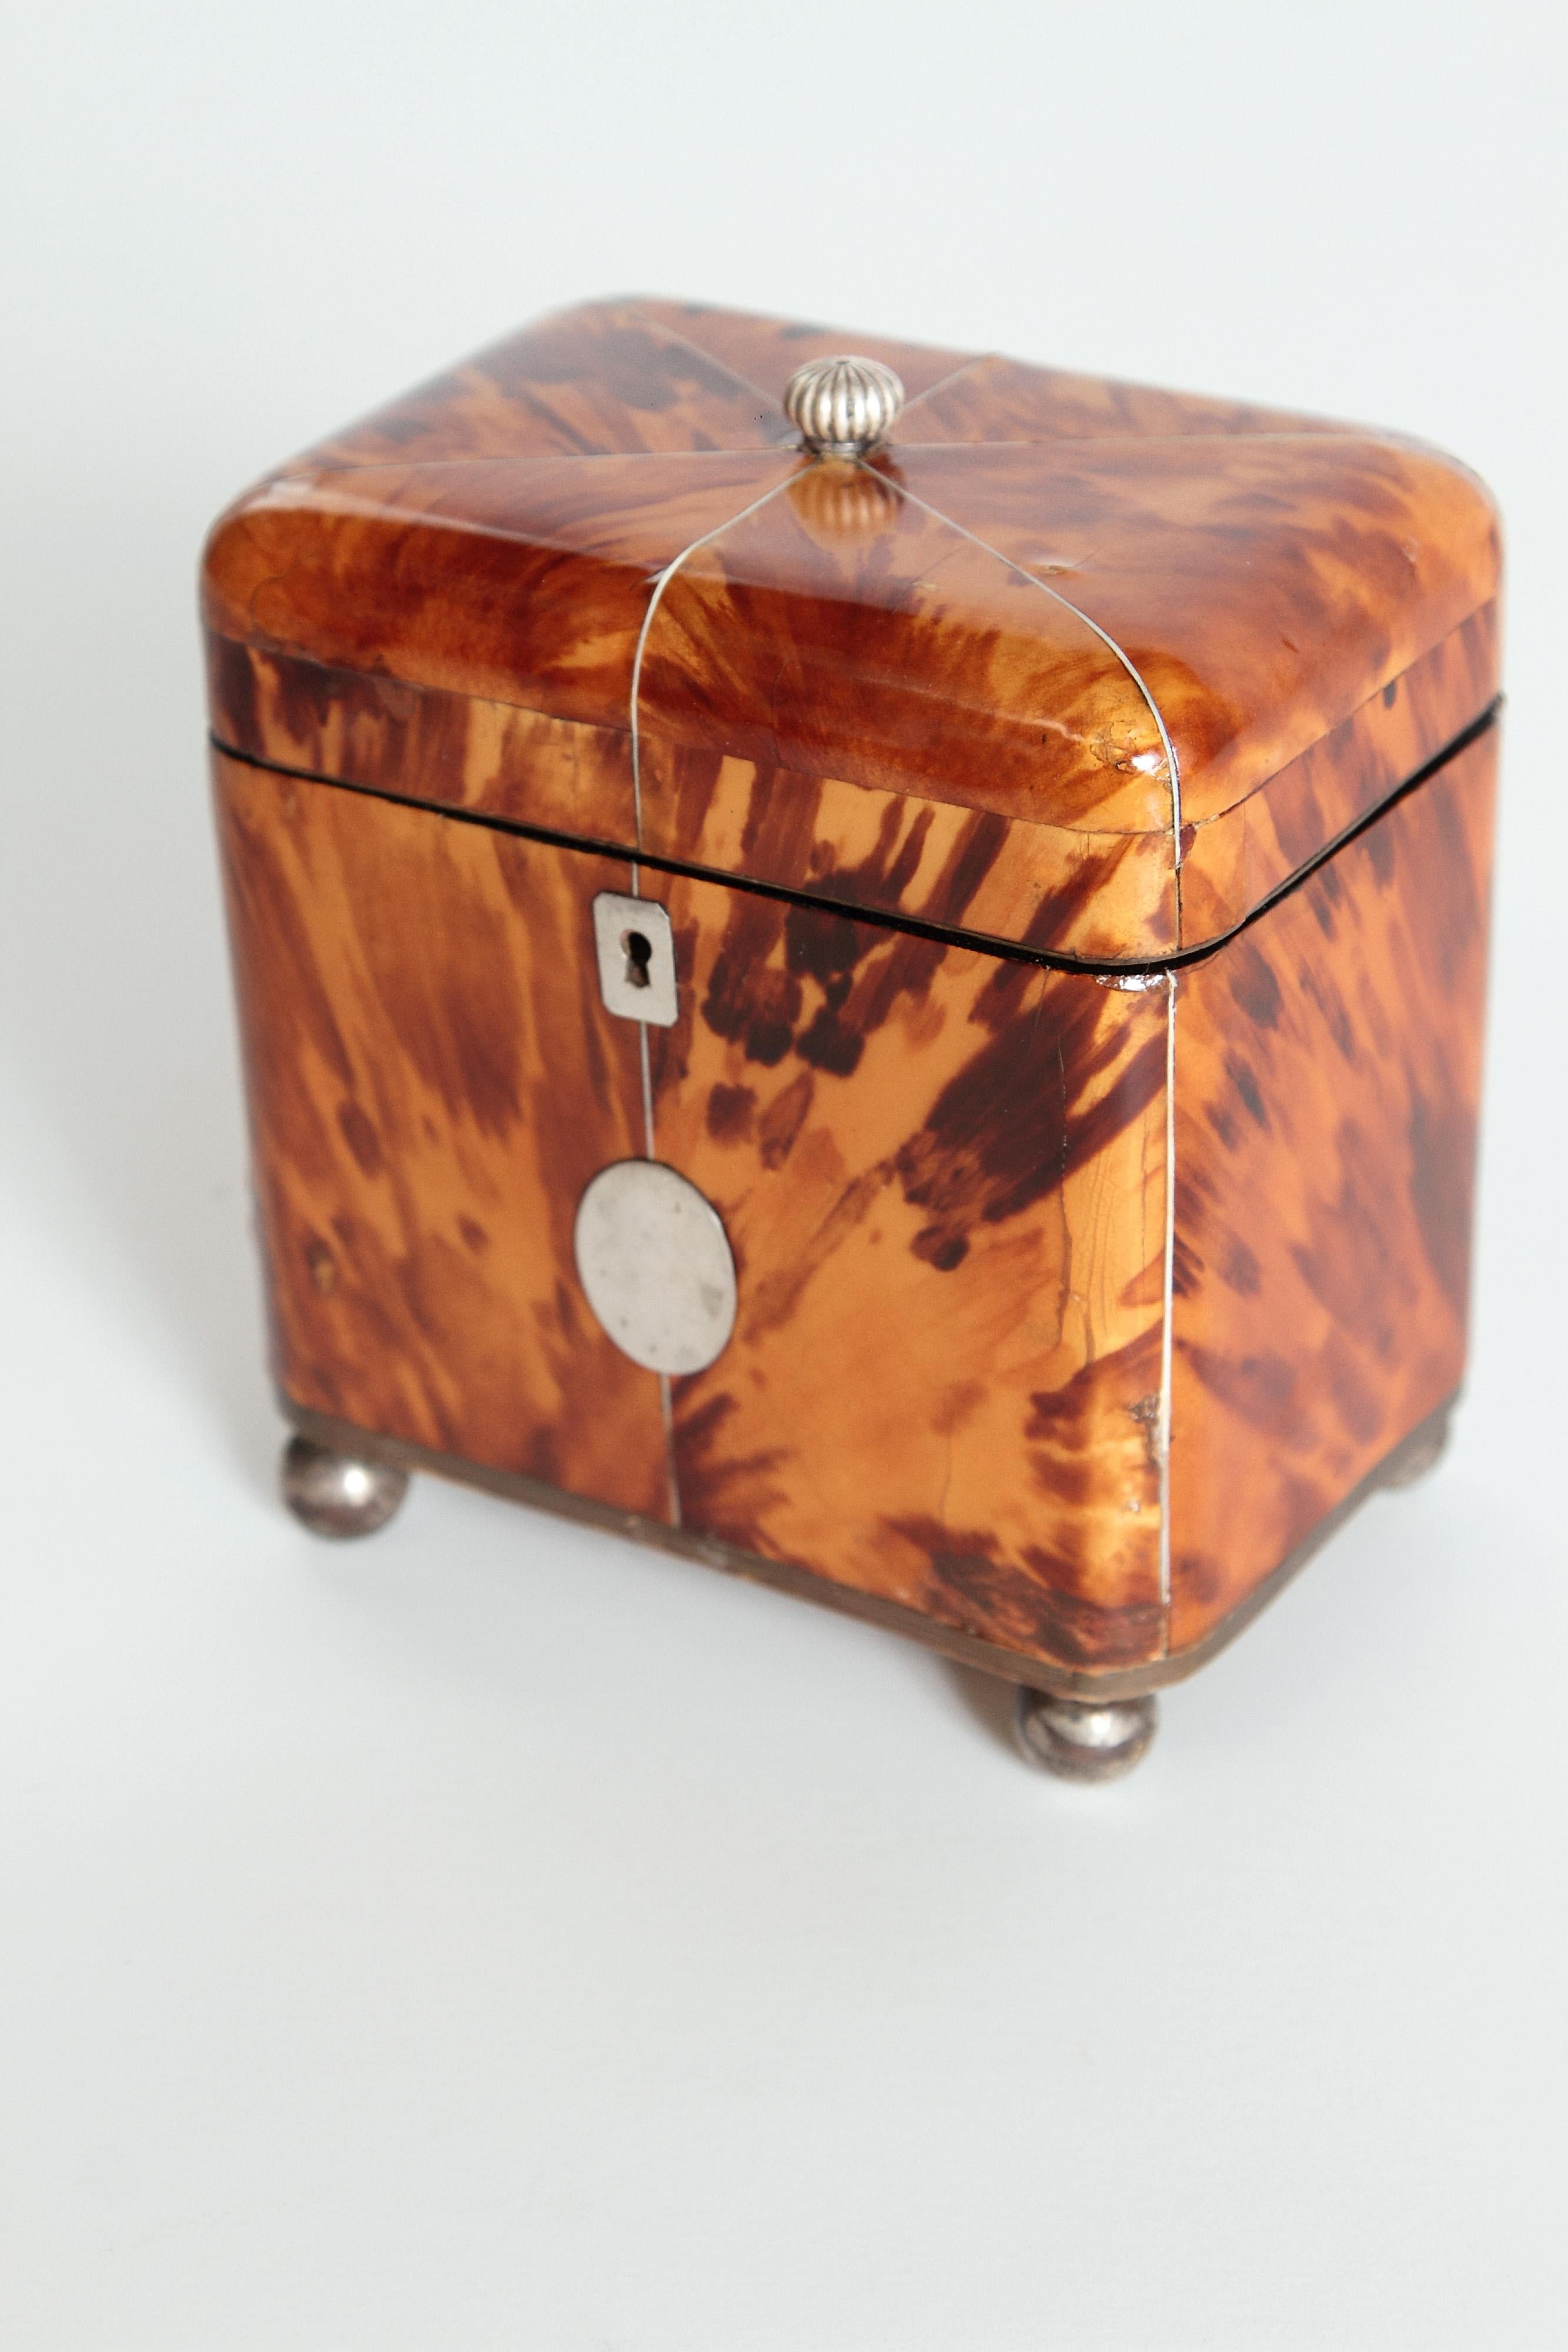 A English Regency tortoiseshell tea caddy with a domed lid containing a silver final pull, silver key hole escutcheon and oval silver plaque. There is one interior compartment with a lid and the box sits on bun feet.